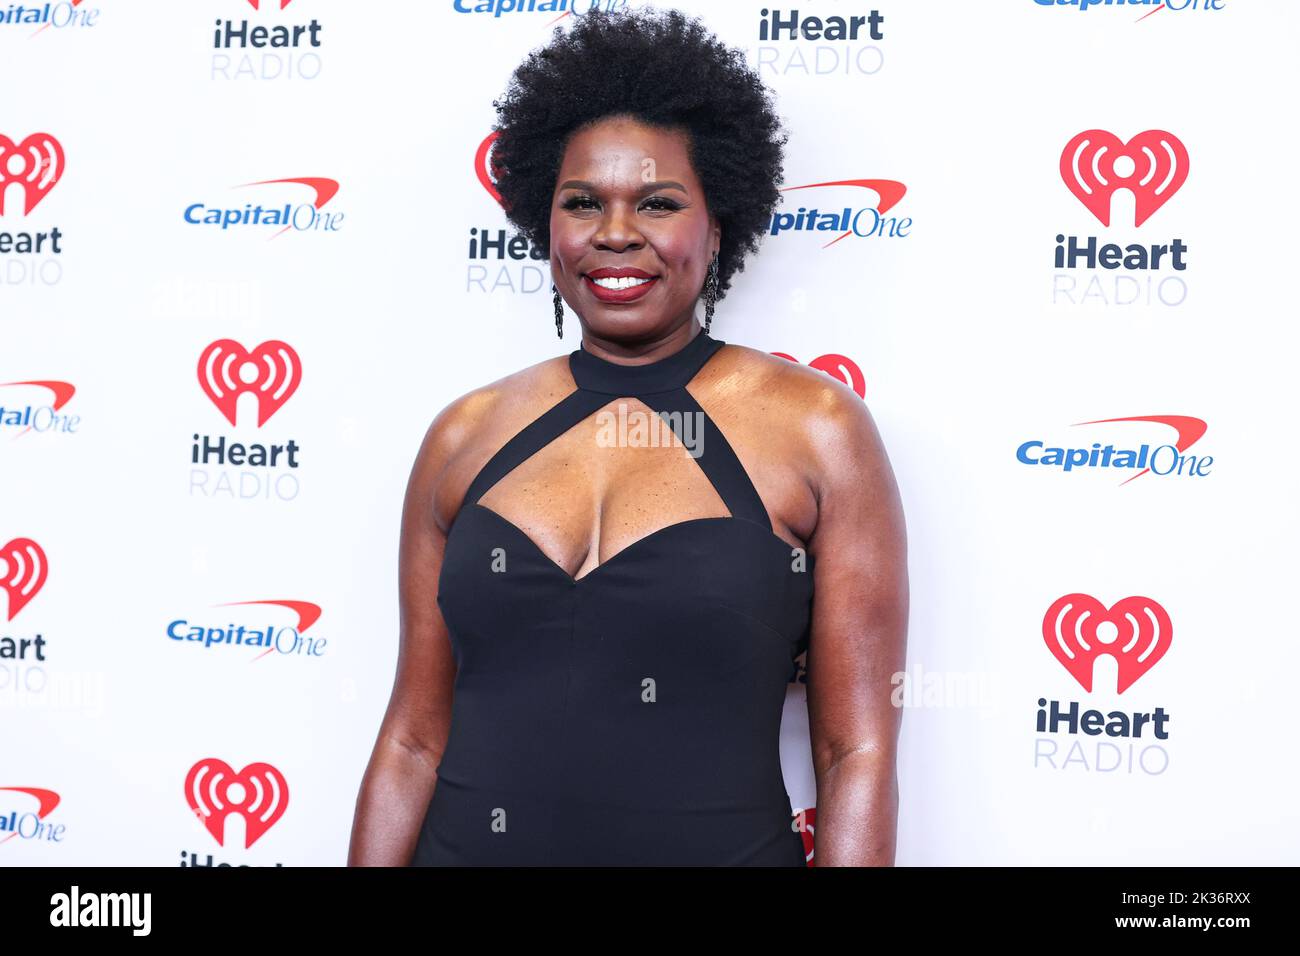 LAS VEGAS, NEVADA, USA - SEPTEMBER 24: Leslie Jones poses in the press room at the 2022 iHeartRadio Music Festival - Night 2 held at the T-Mobile Arena on September 24, 2022 in Las Vegas, Nevada, United States. (Photo by Xavier Collin/Image Press Agency) Stock Photo